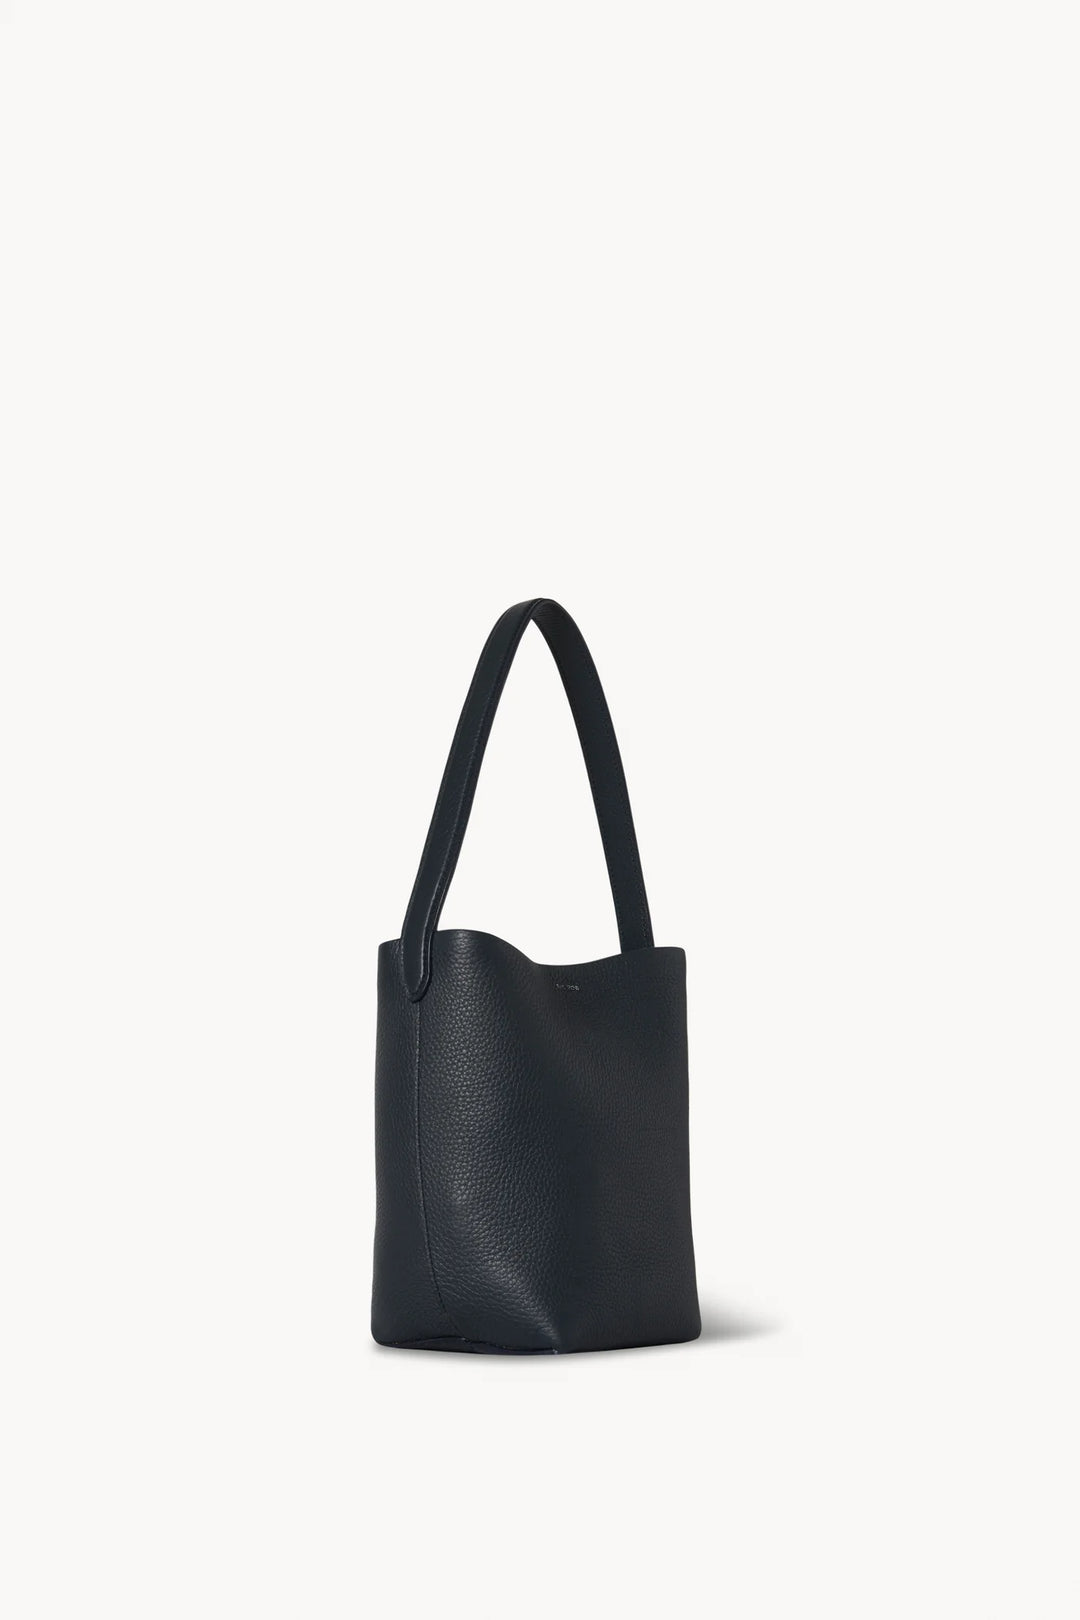 THE ROW MEDIUM N/S PARK TOTE IN LEATHER